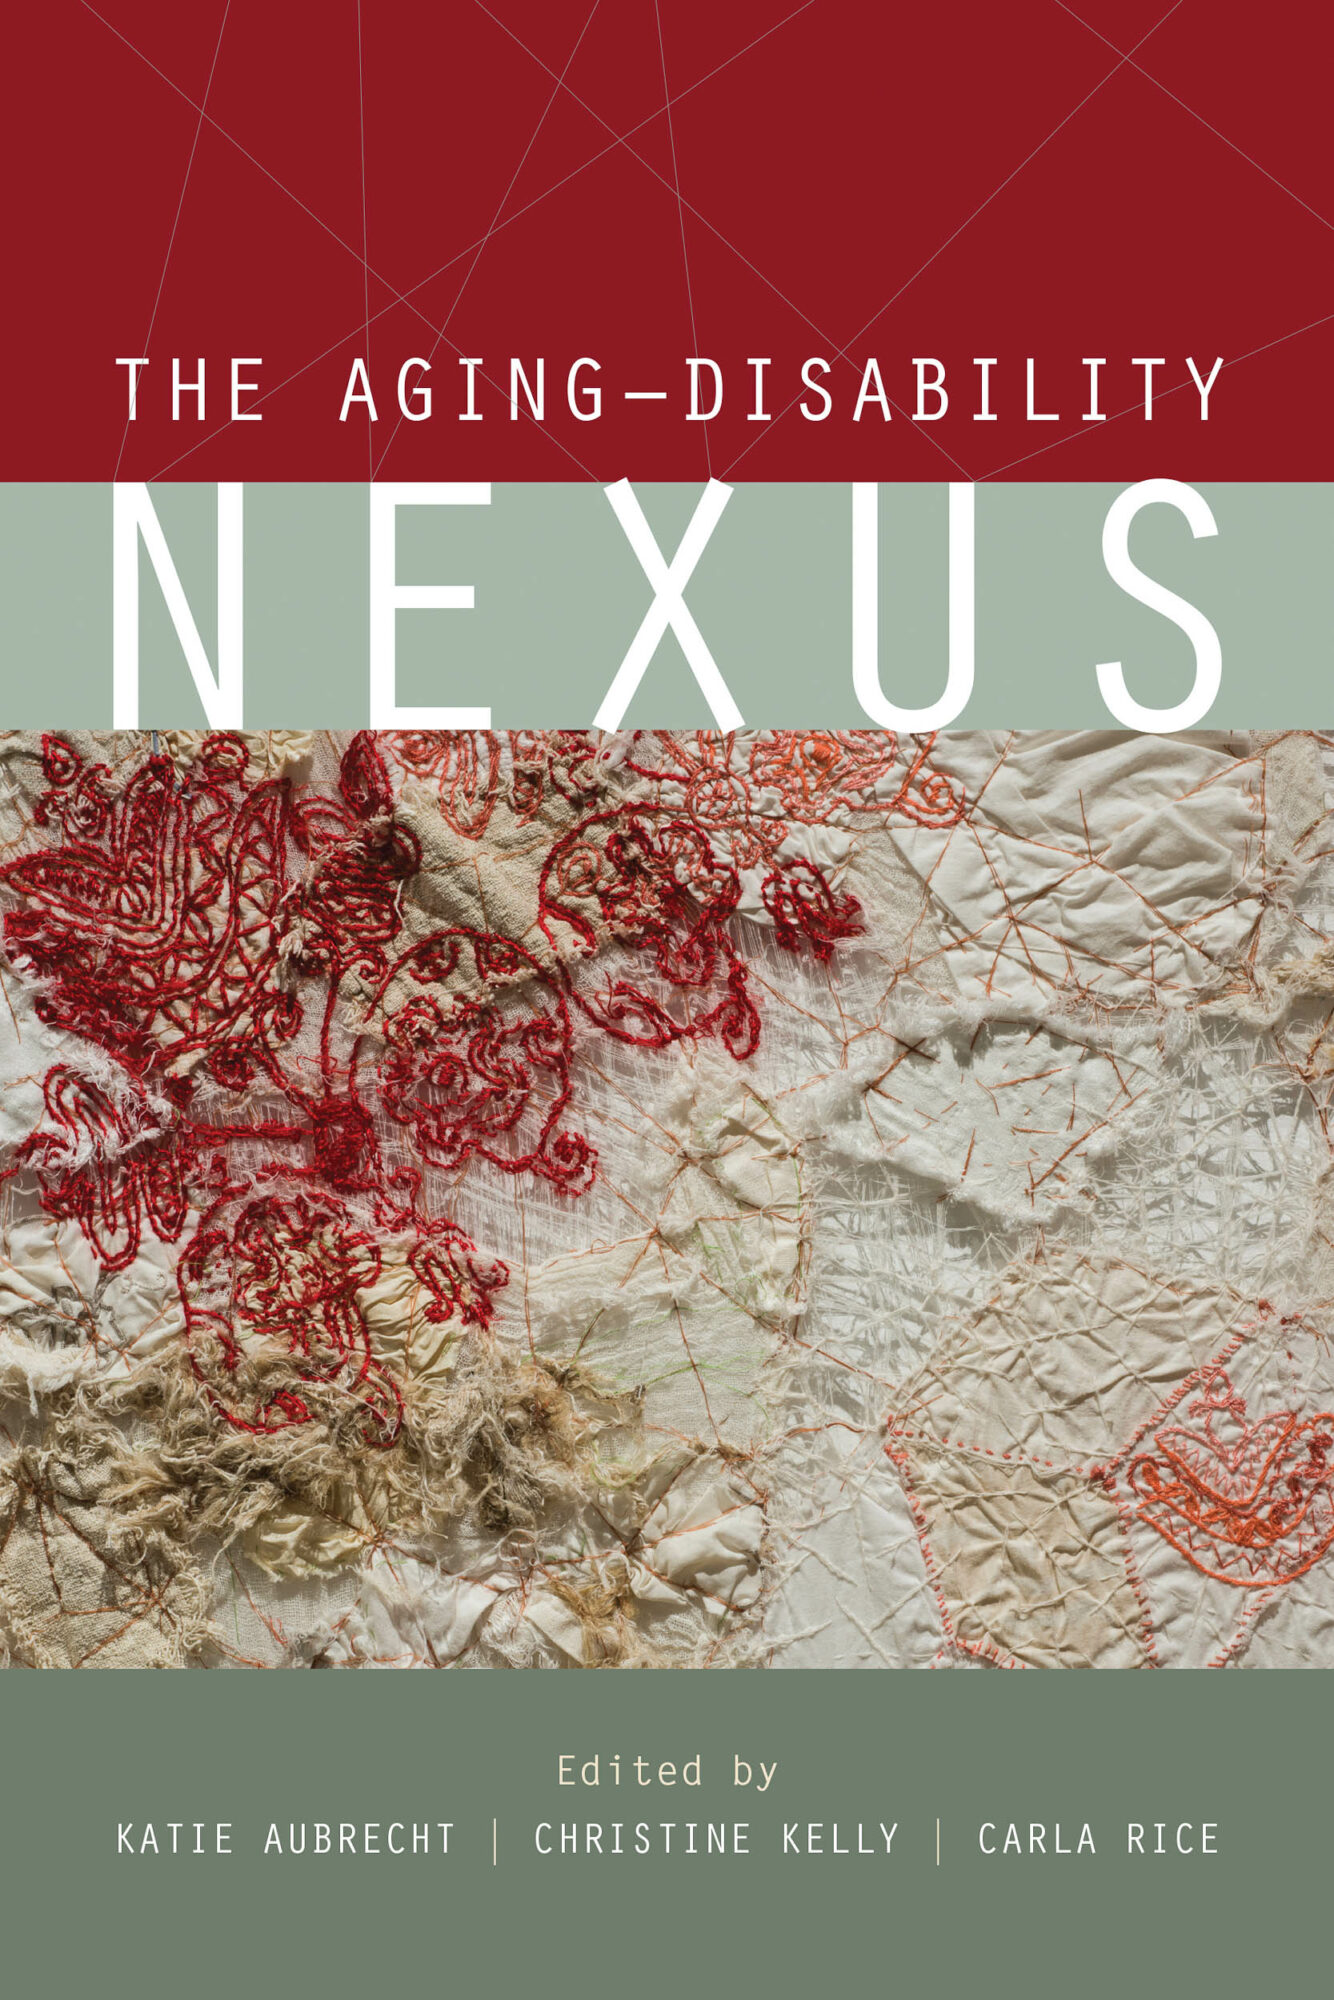 The cover of the book The Aging-Disability Nexus.